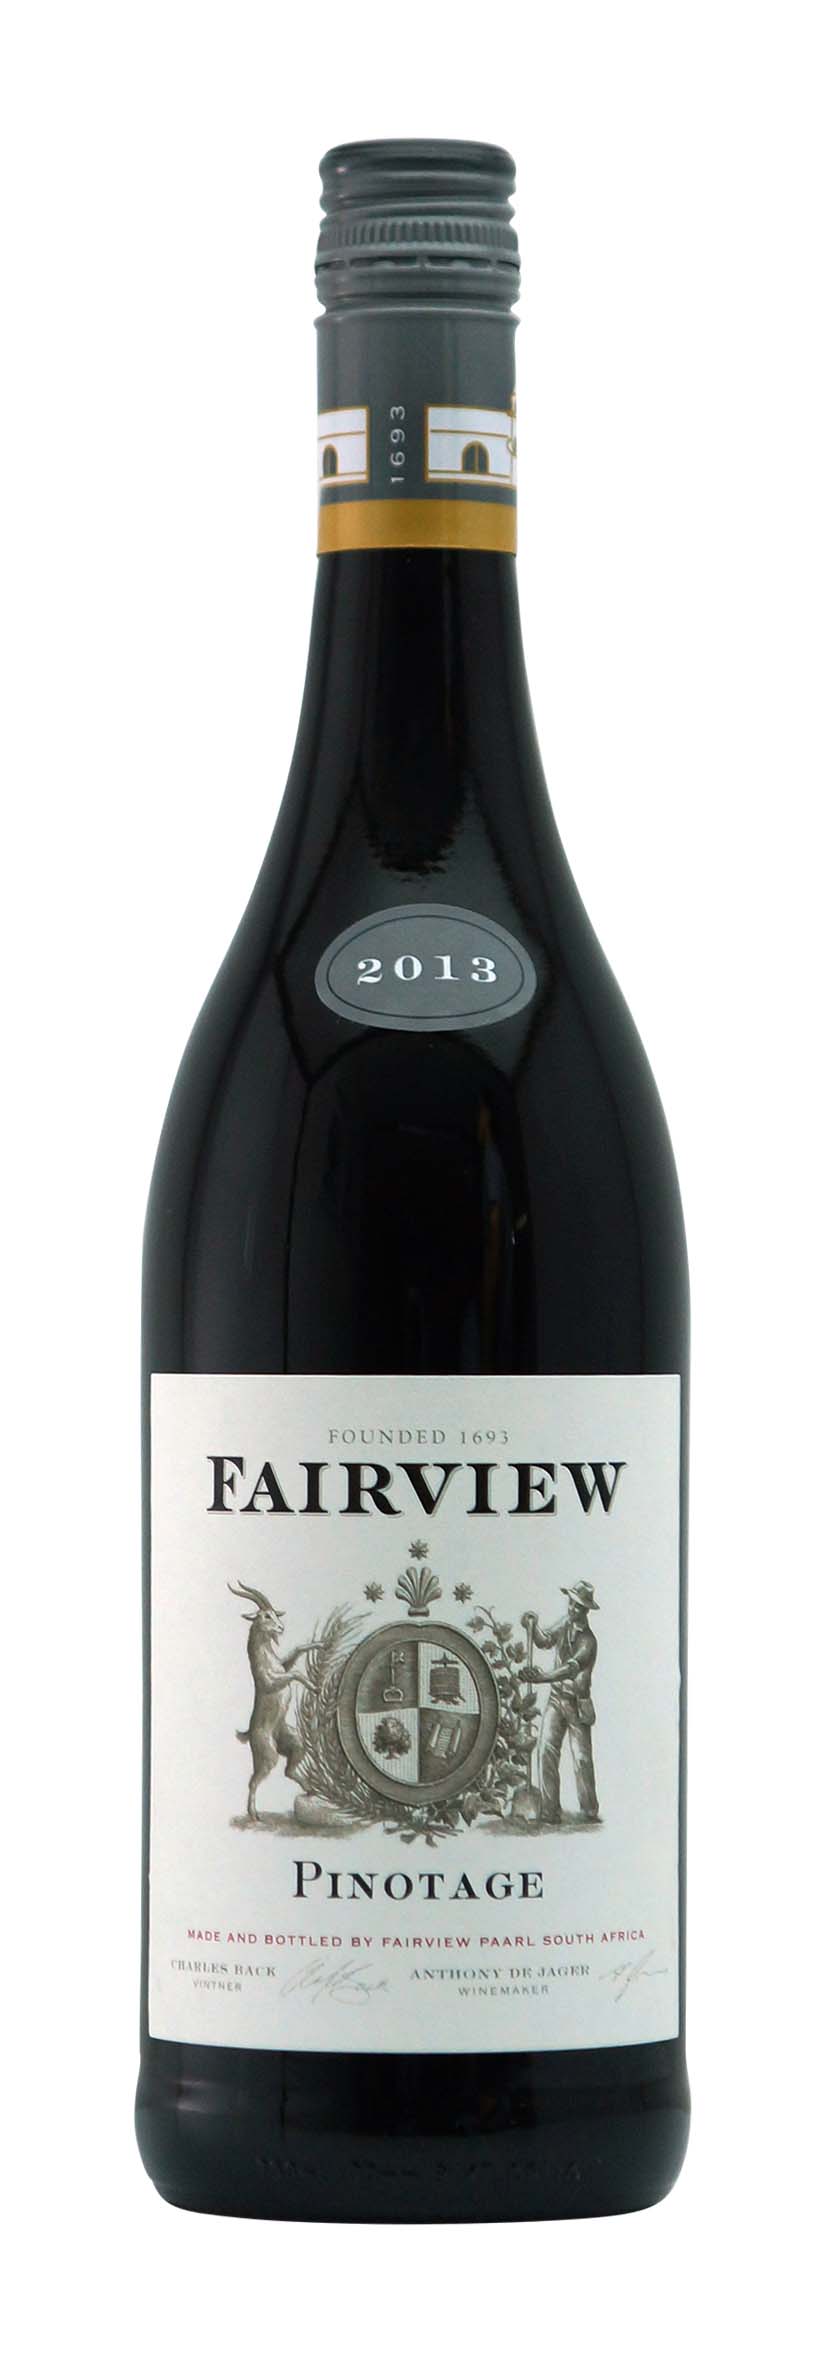 Paarl Fairview Pinotage 2013